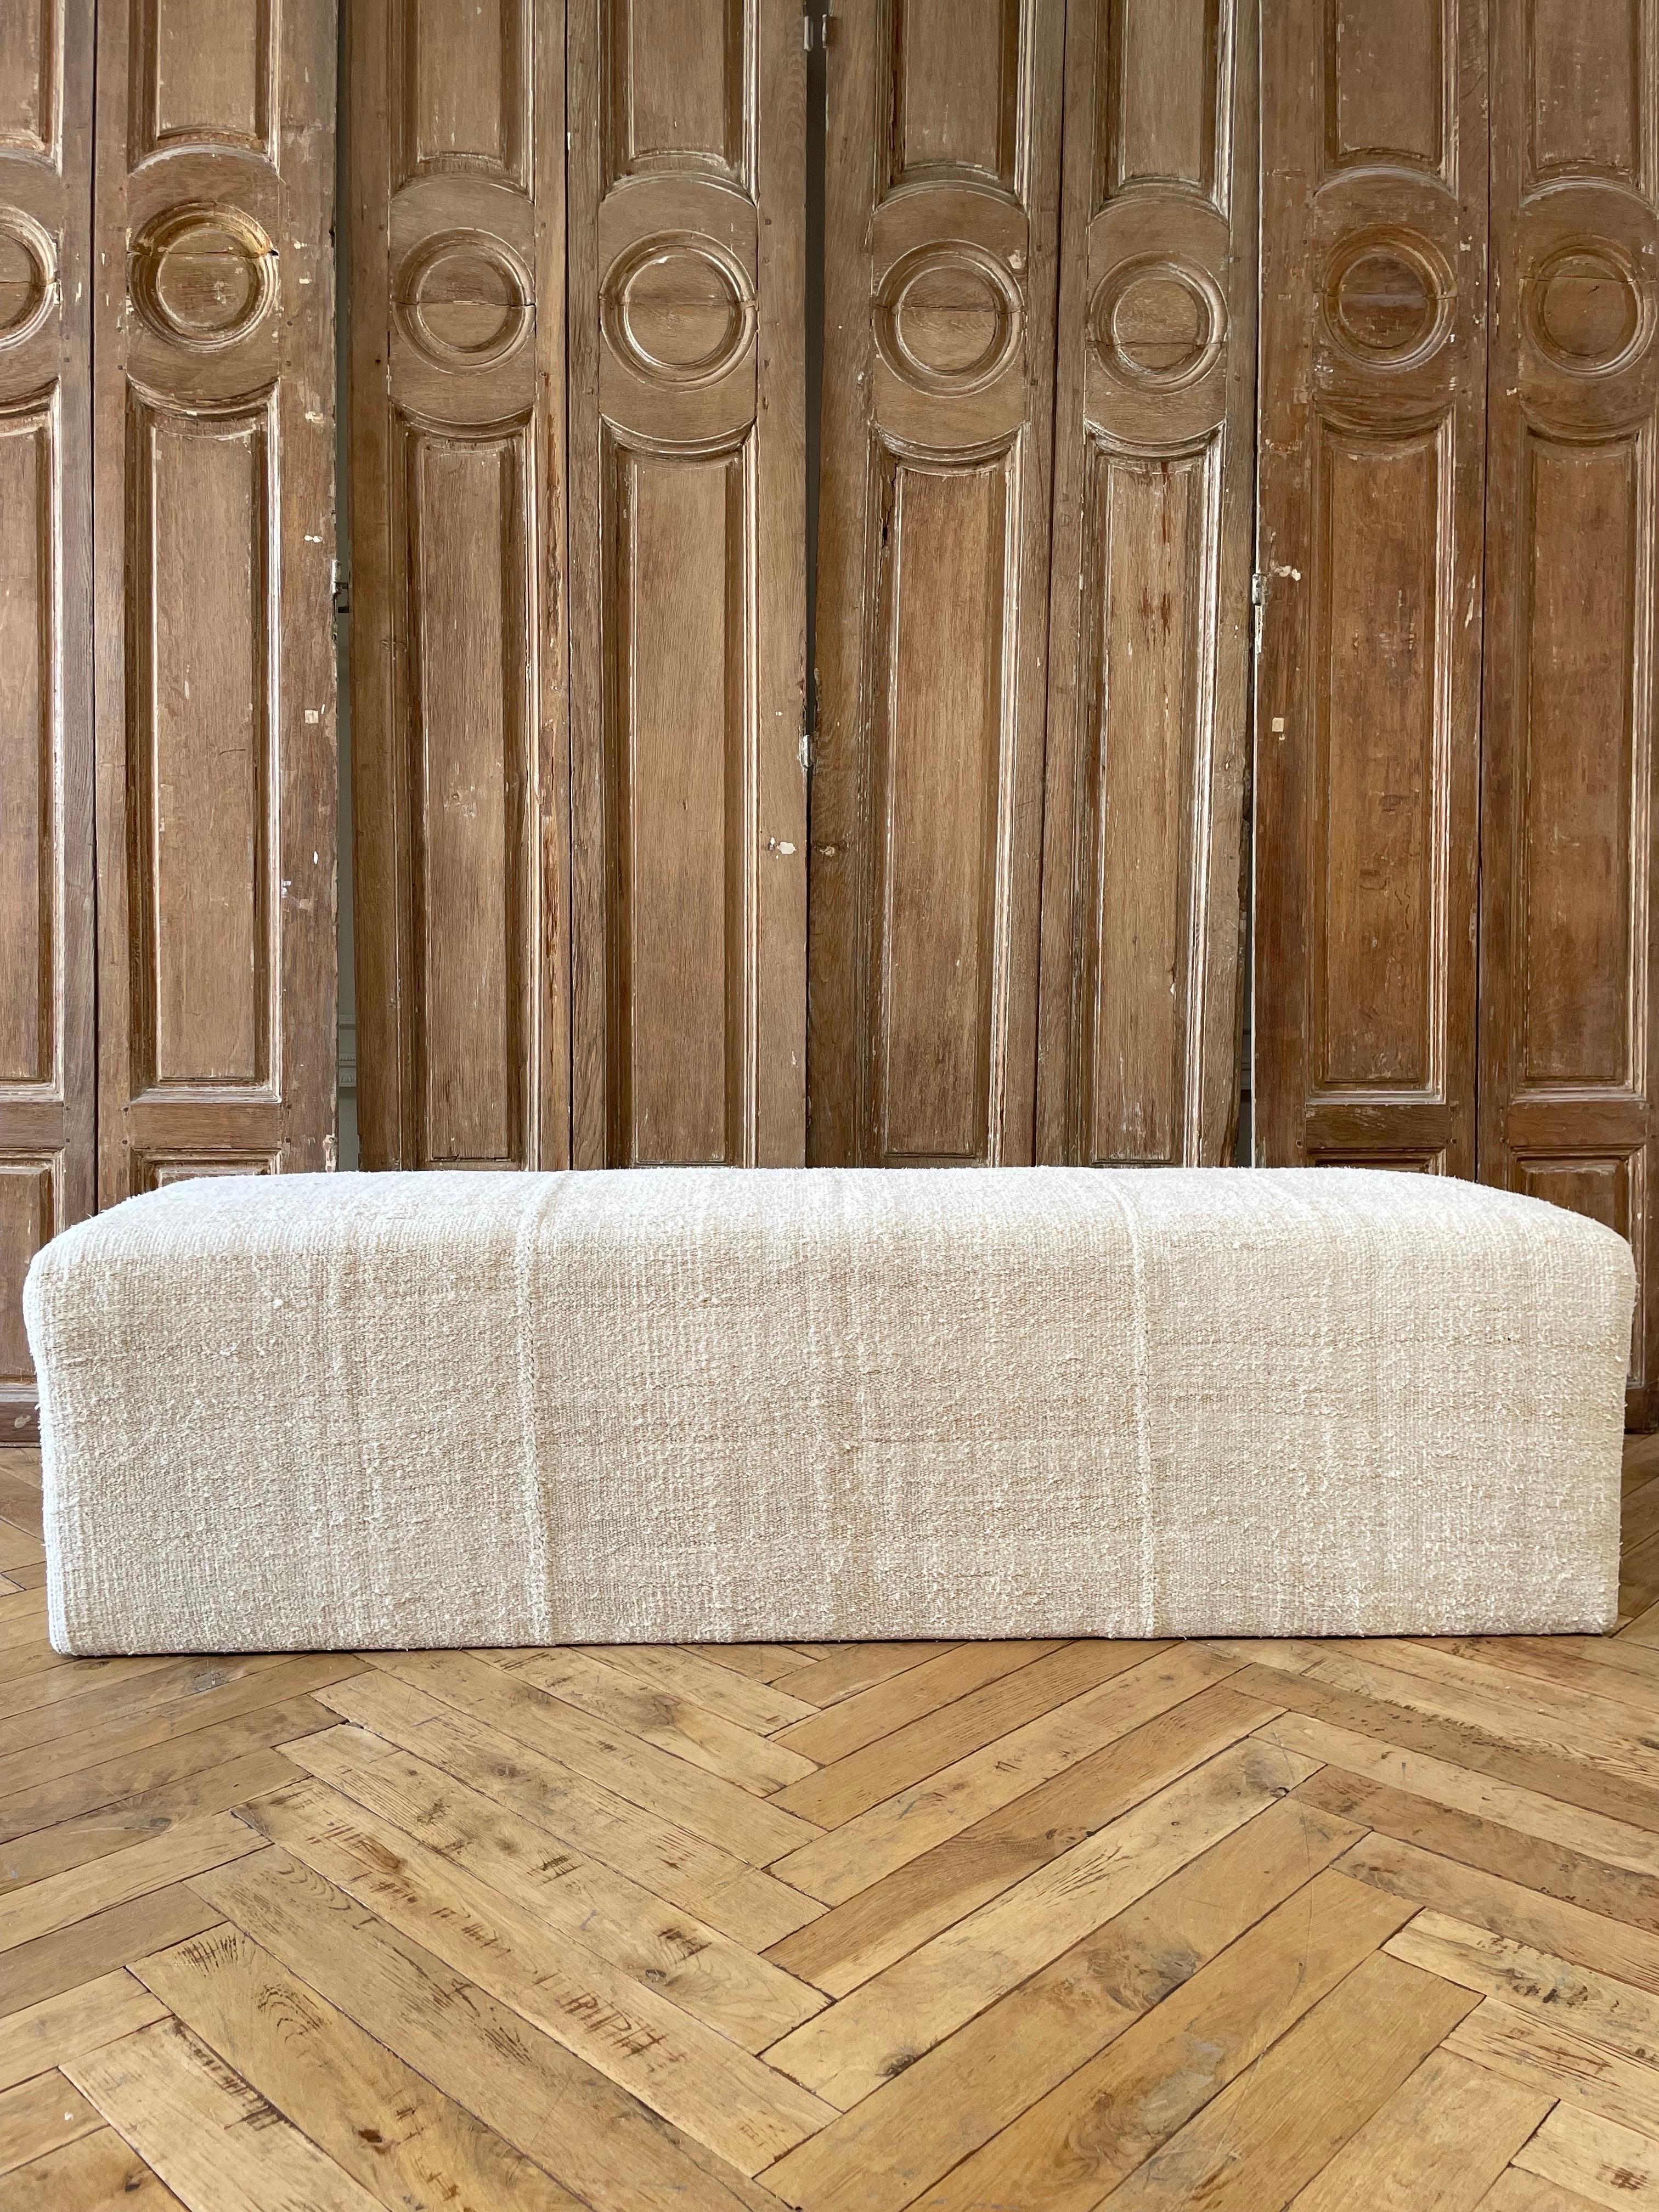 Beautiful Custom MadeCube ottoman. Made from a vintage turkish hemp and wool rug, in an off white, with faded stripes. The stripes are really faded taupe/brown, and can appear as a dijon coloring in some lights. Original seams, sewn with an overlock